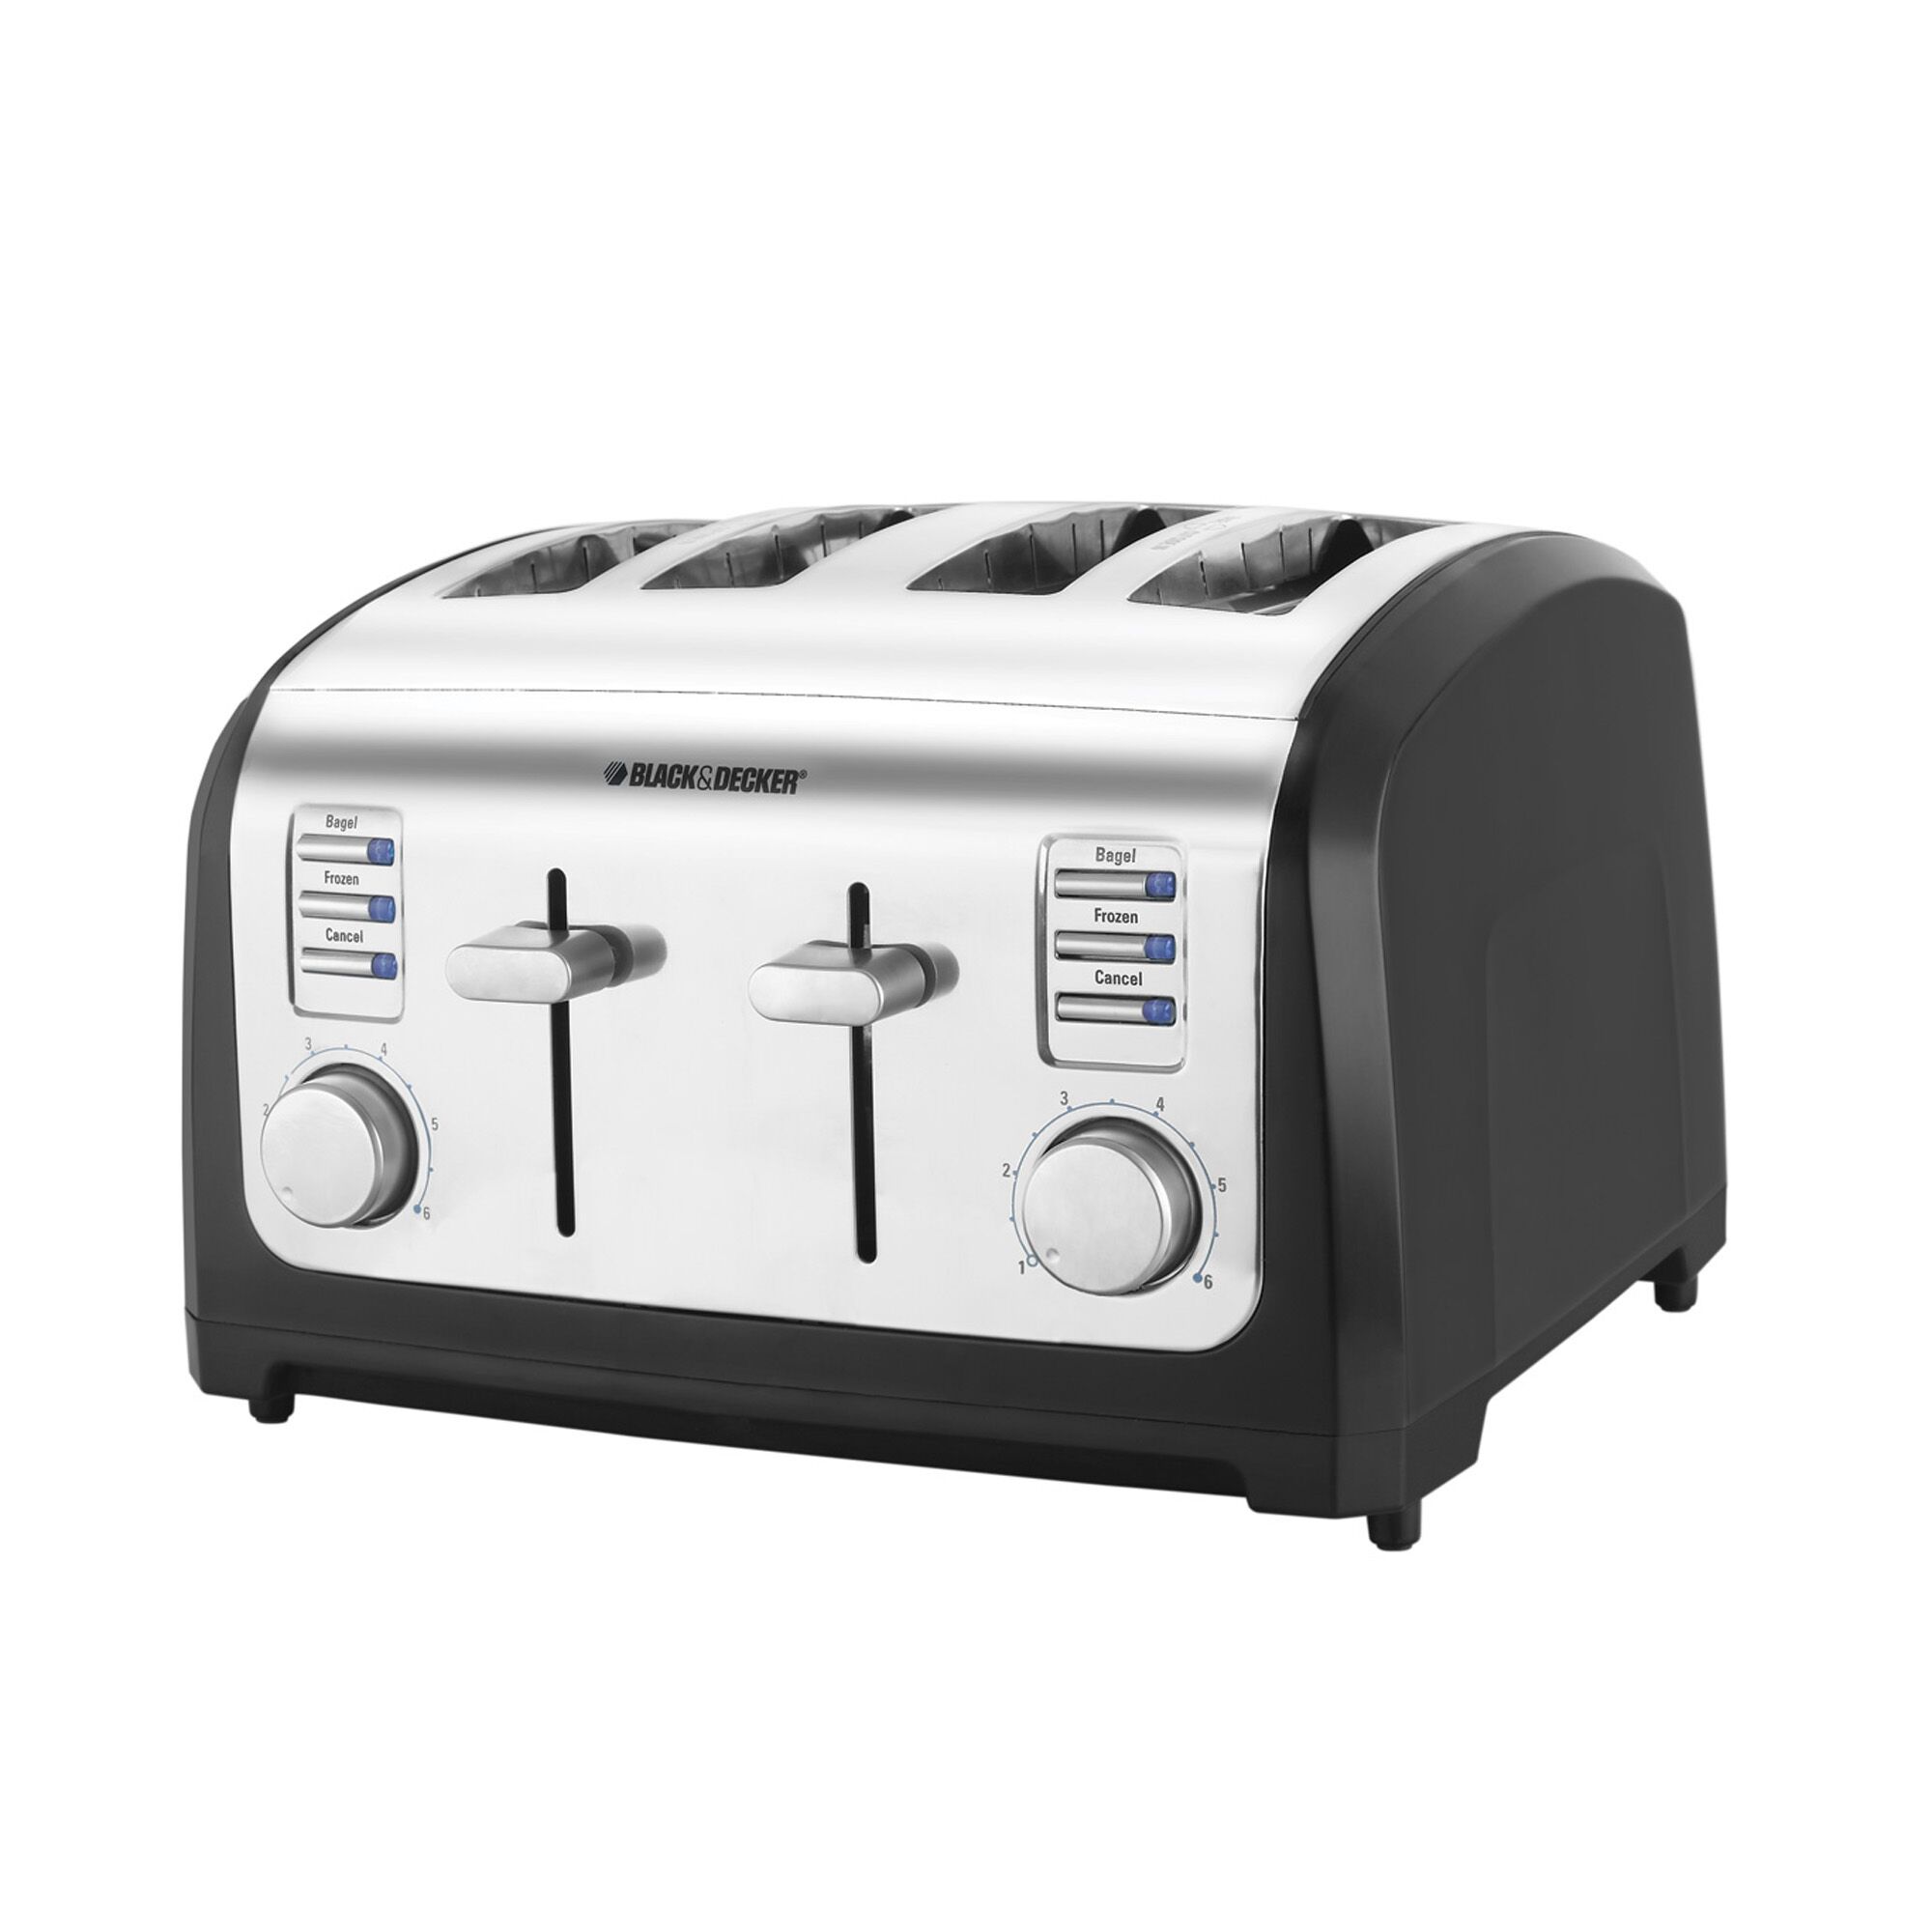 Right side view of 4 Slice Toaster.